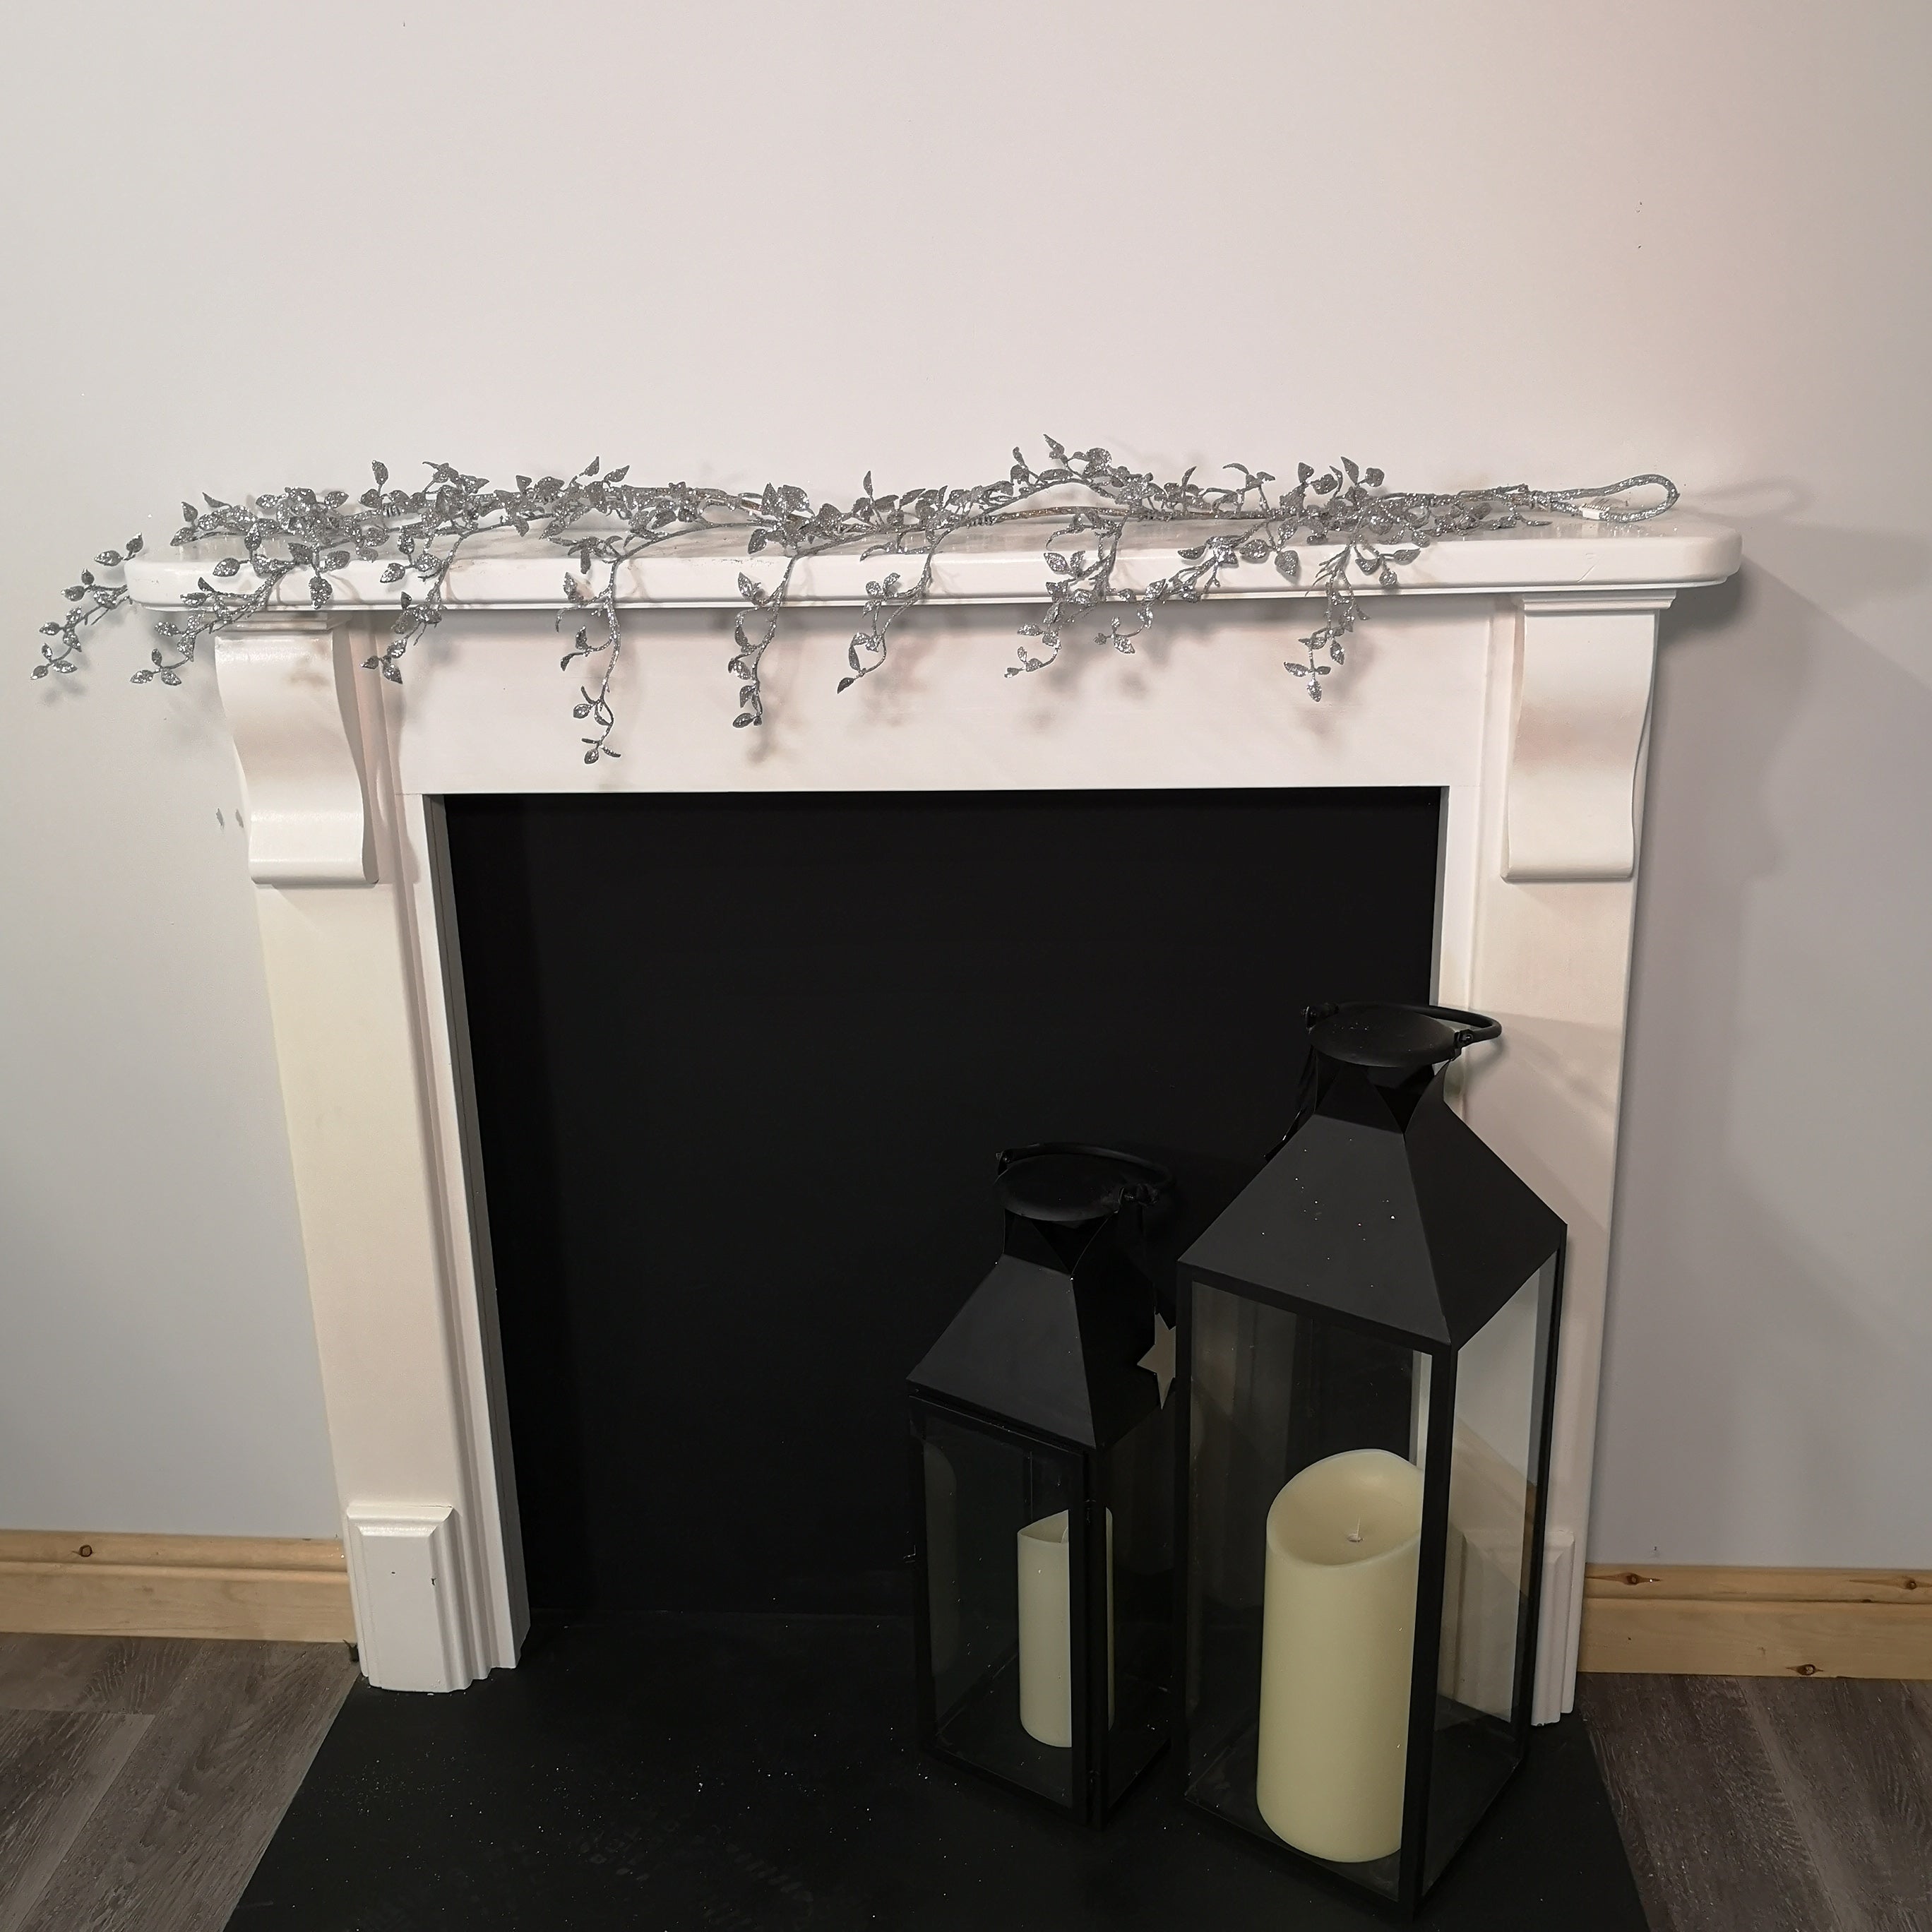 150cm Christmas Silver Glitter Leaf Garland with Hanging Loop